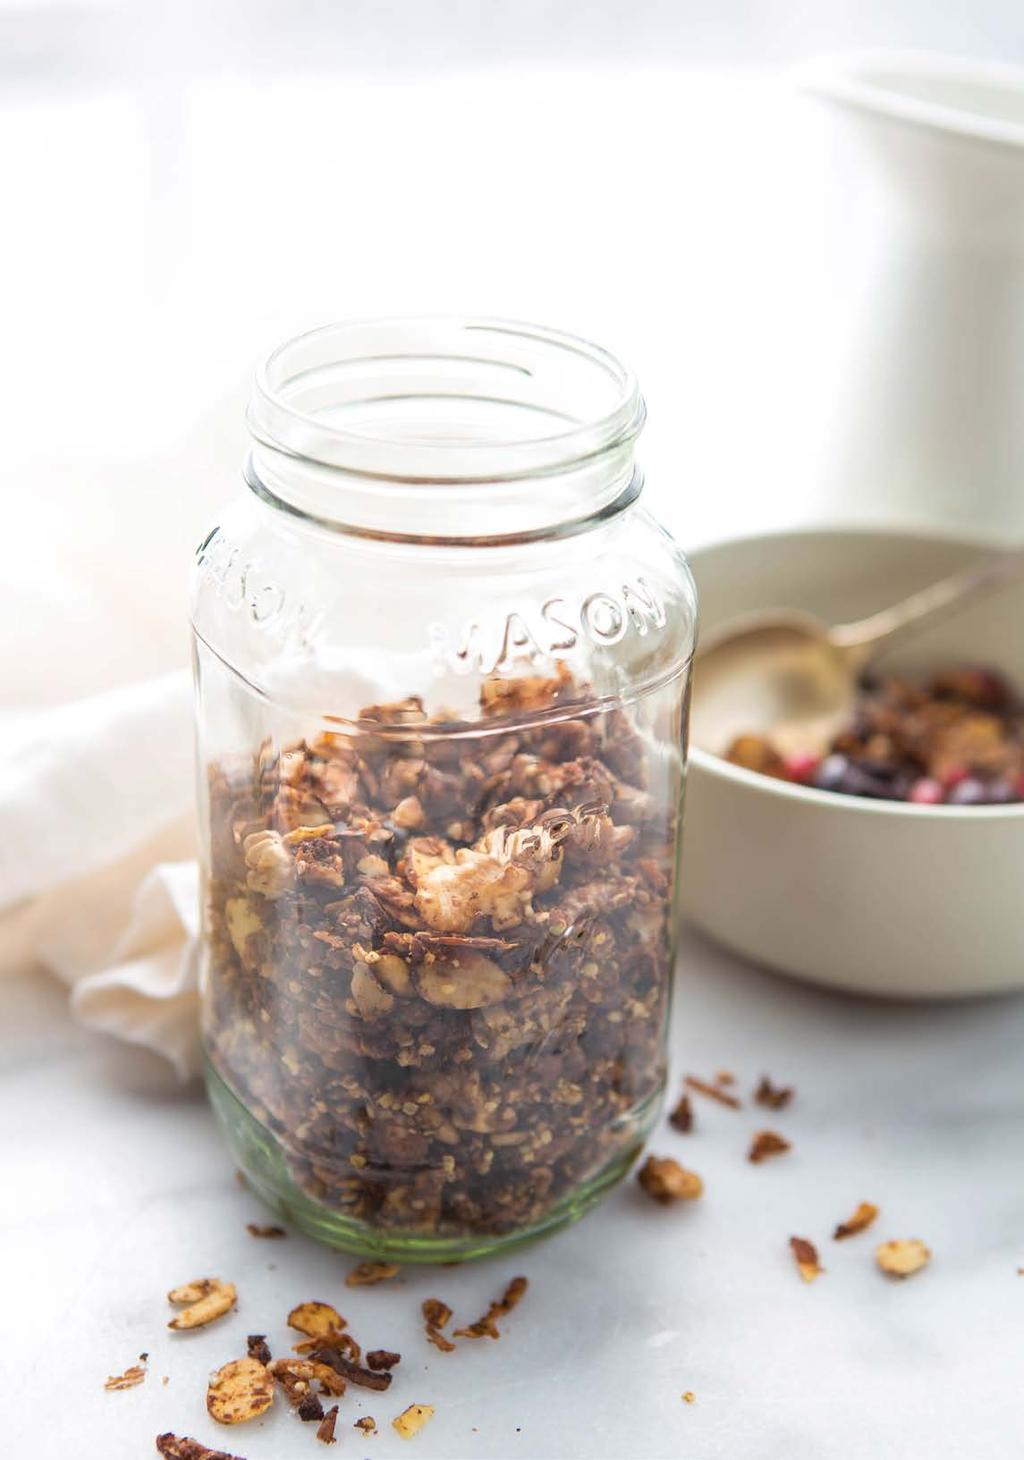 8. Paleo Protein Powder Granola Chocolately granola bakes into a crunchy gluten-free, grain-free topping that is absolutely delicious!